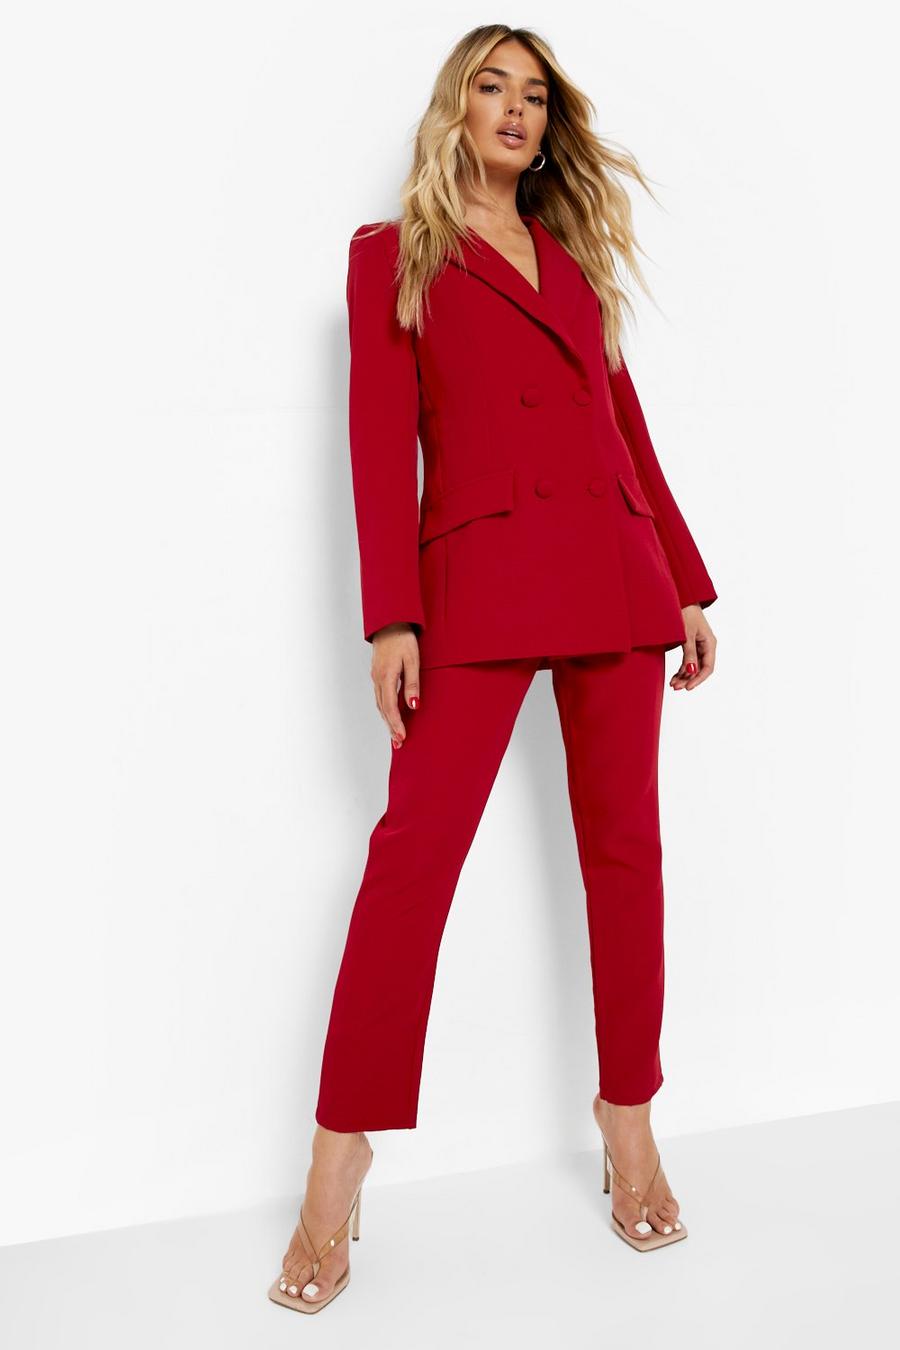 Special Occasion Pant Suits  Ladies Pant Suits for Special